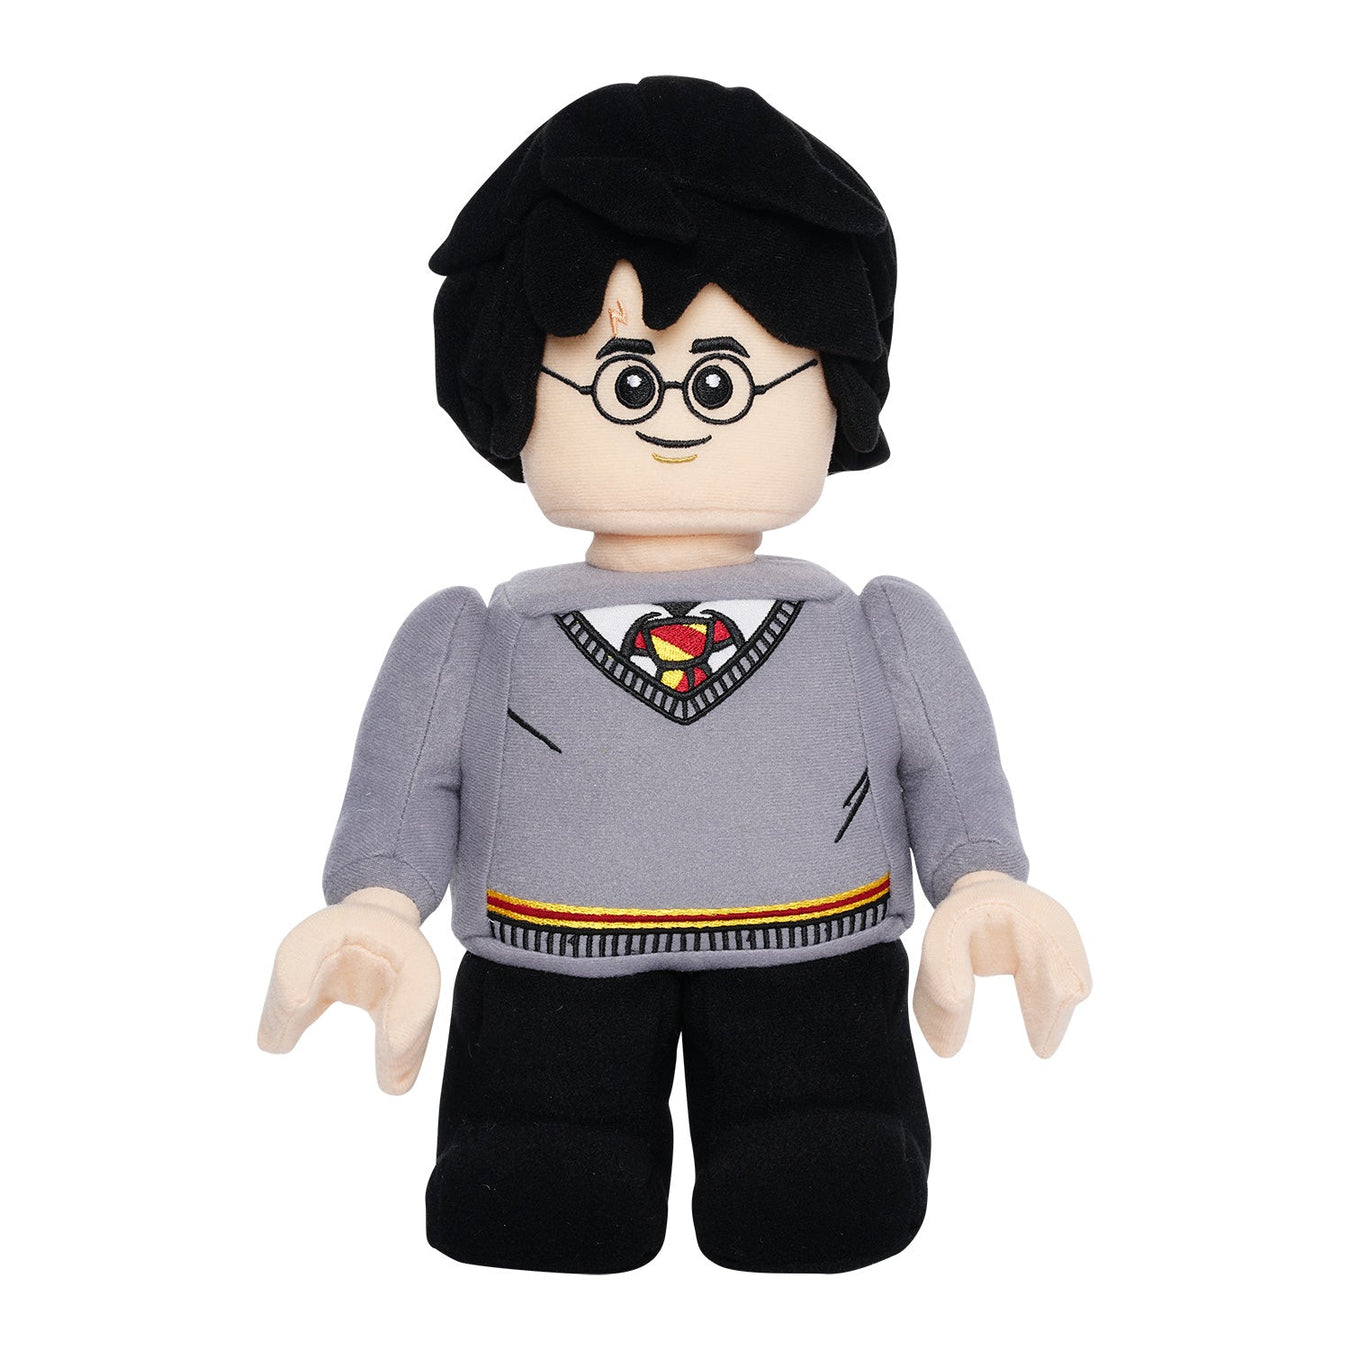 LEGO Minifigure Plush Harry Potter Collection by Manhattan Toys